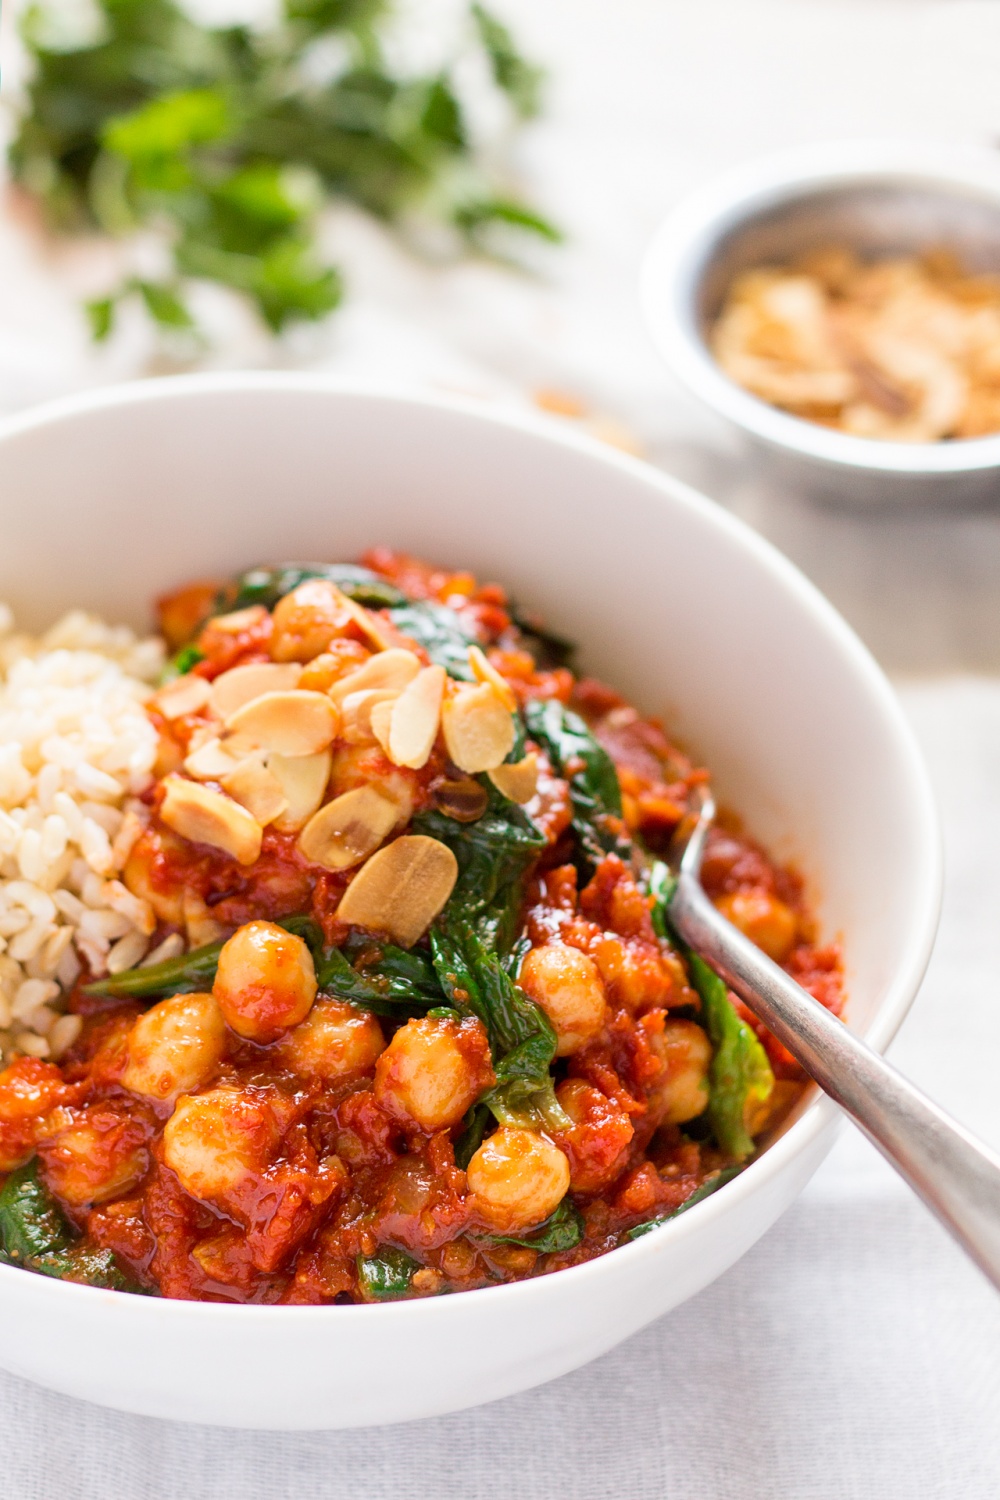 Spanish chickpea and spinach stew - Lazy Cat Kitchen